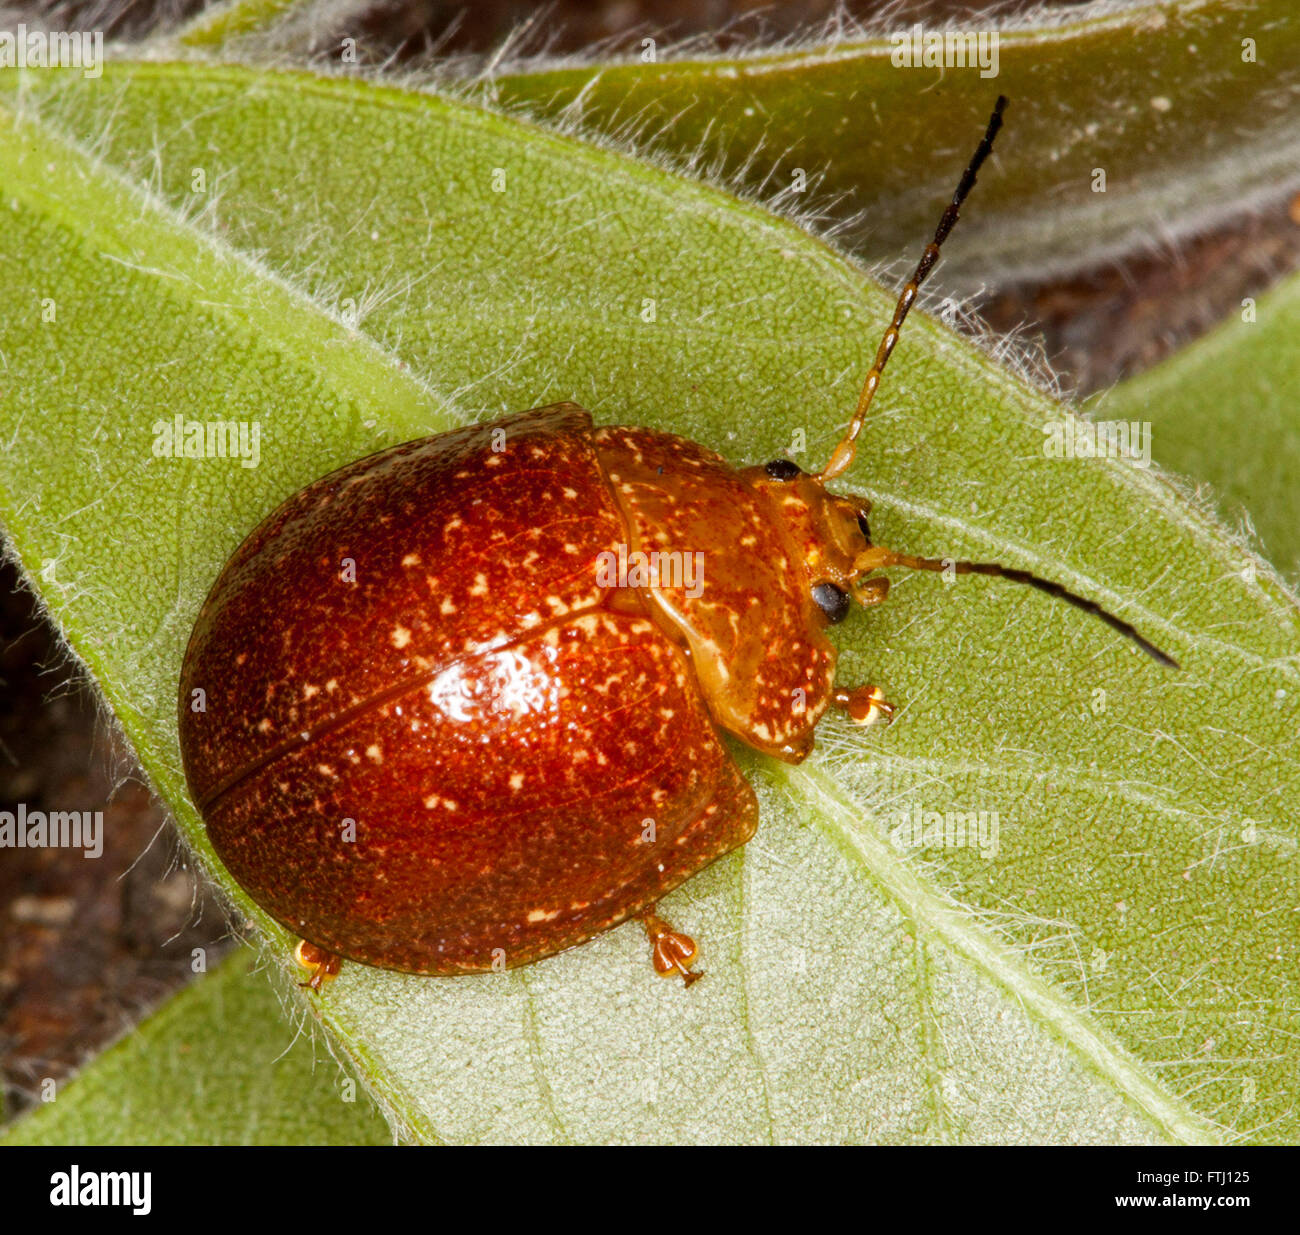 Macro image of red-brown Australian acacia leaf beetle Dicranosterna picea with eyes, feet & antennae, shown on green hairy leaf Stock Photo